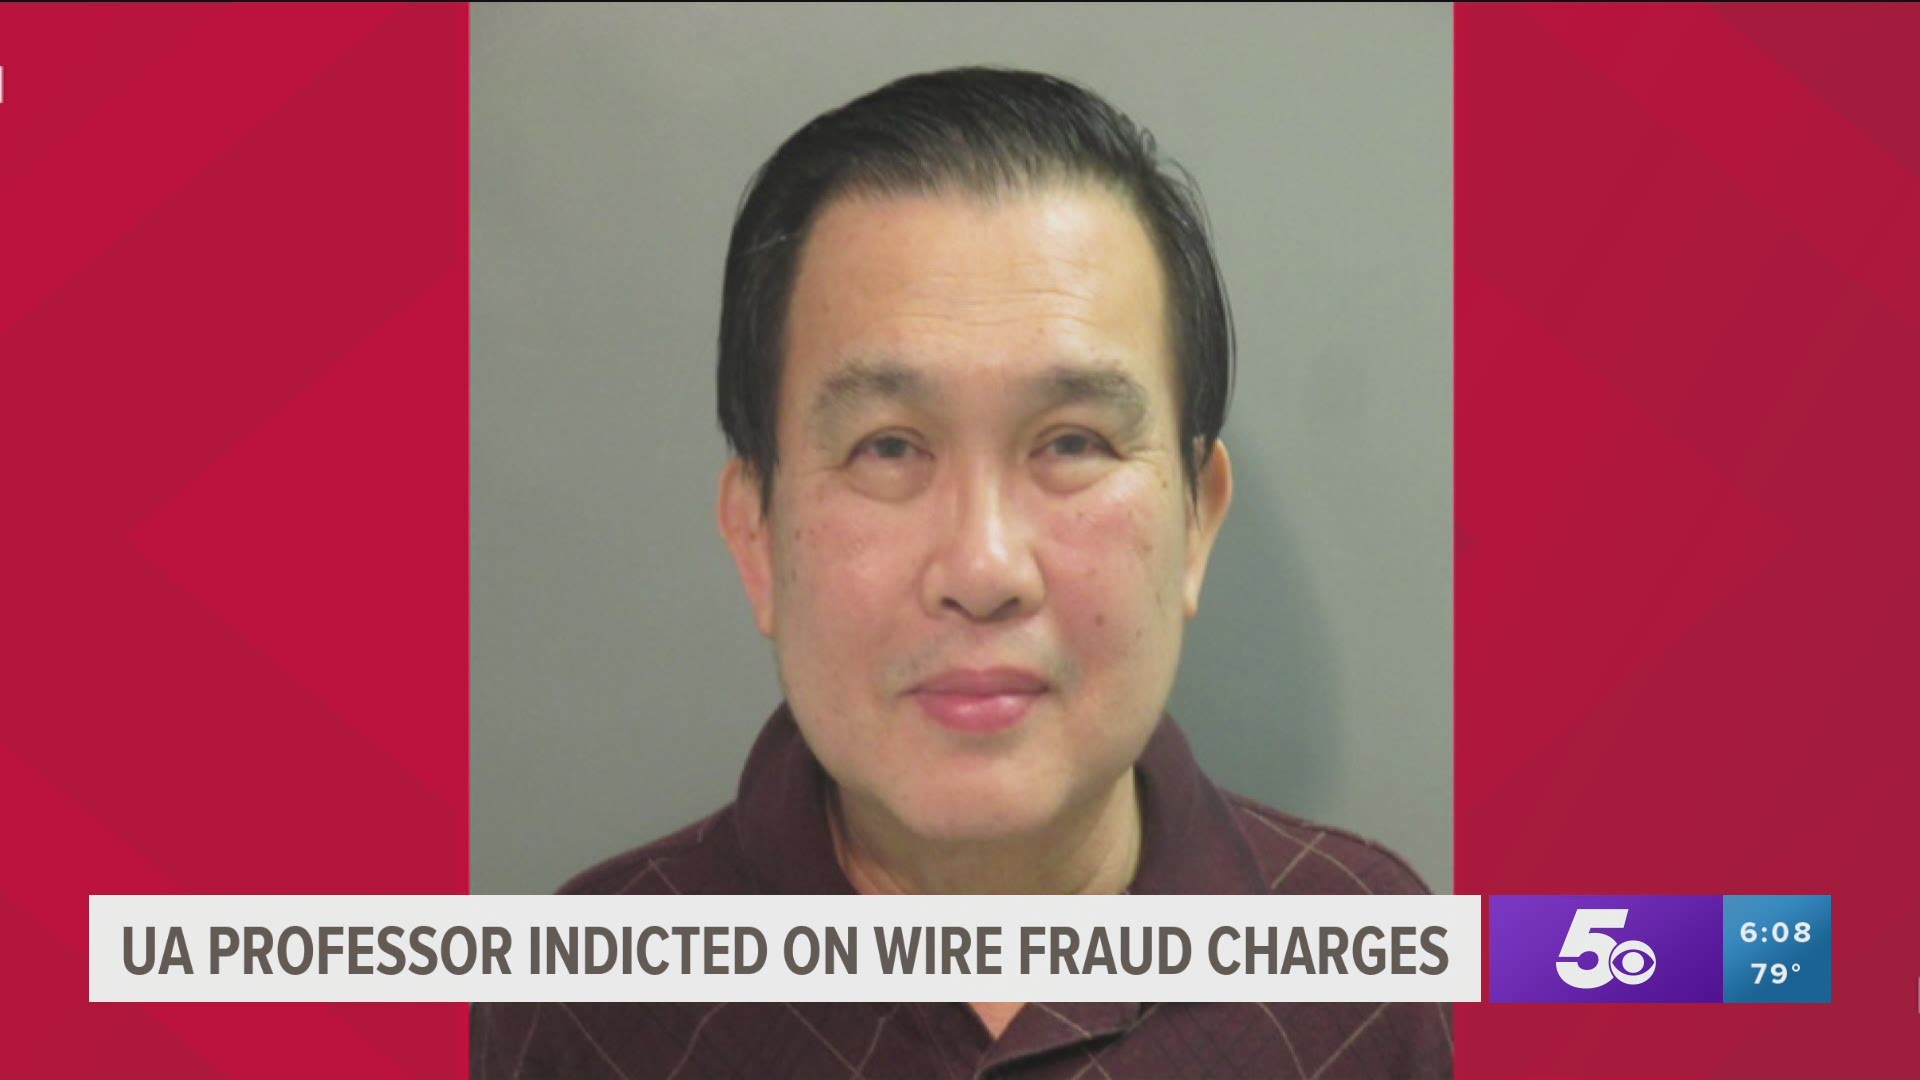 Simon Saw-Teong Ang was indicted on 42 counts of wire fraud and two counts of passport fraud. https://bit.ly/3gawGms